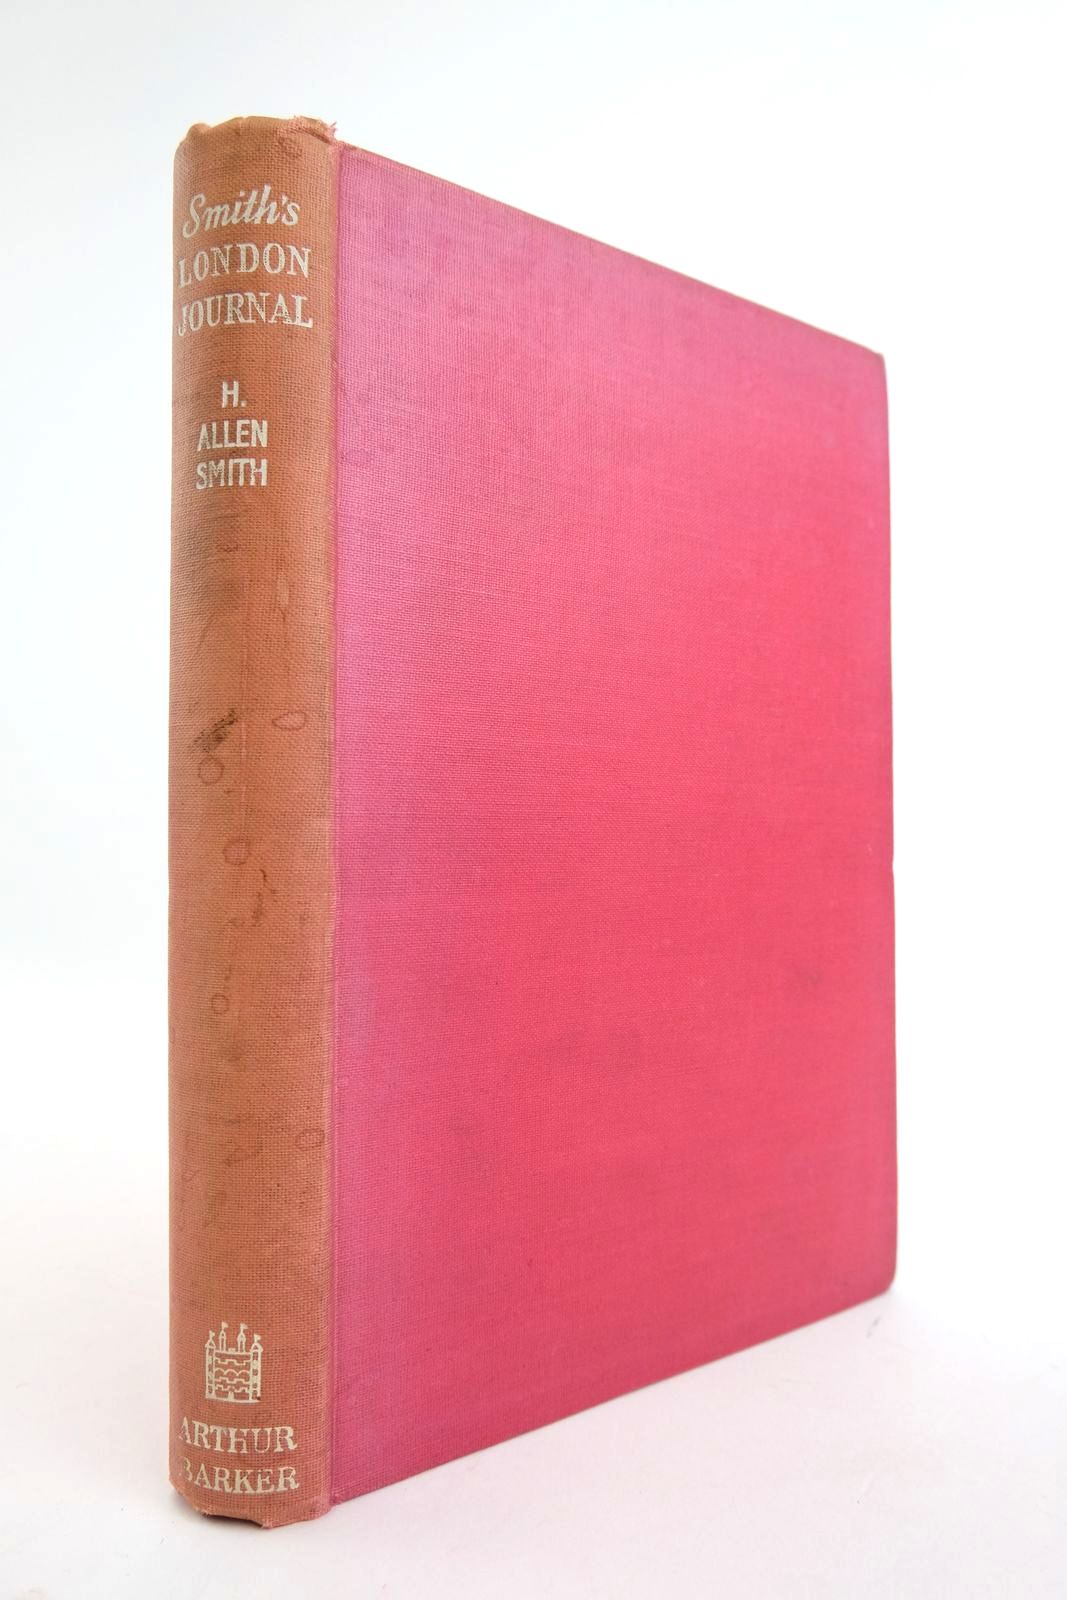 Photo of SMITH'S LONDON JOURNAL- Stock Number: 2133852